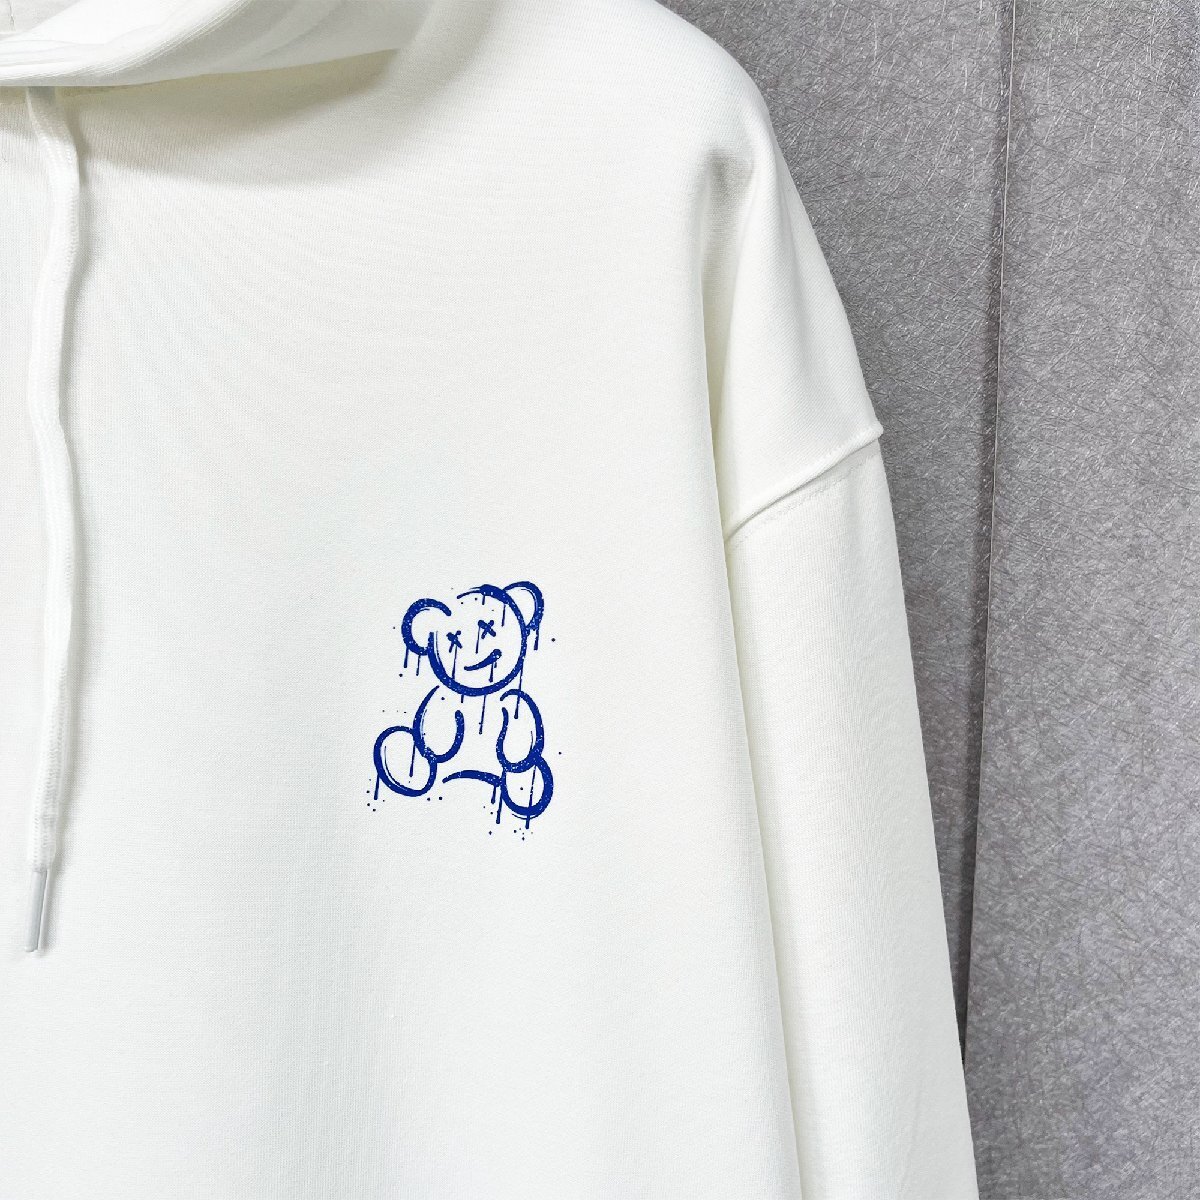  piece .* Parker regular price 4 ten thousand *Emmauela* Italy * milano departure * cotton 100% comfortable soft bear britain character Street cut and sewn pull over L/48